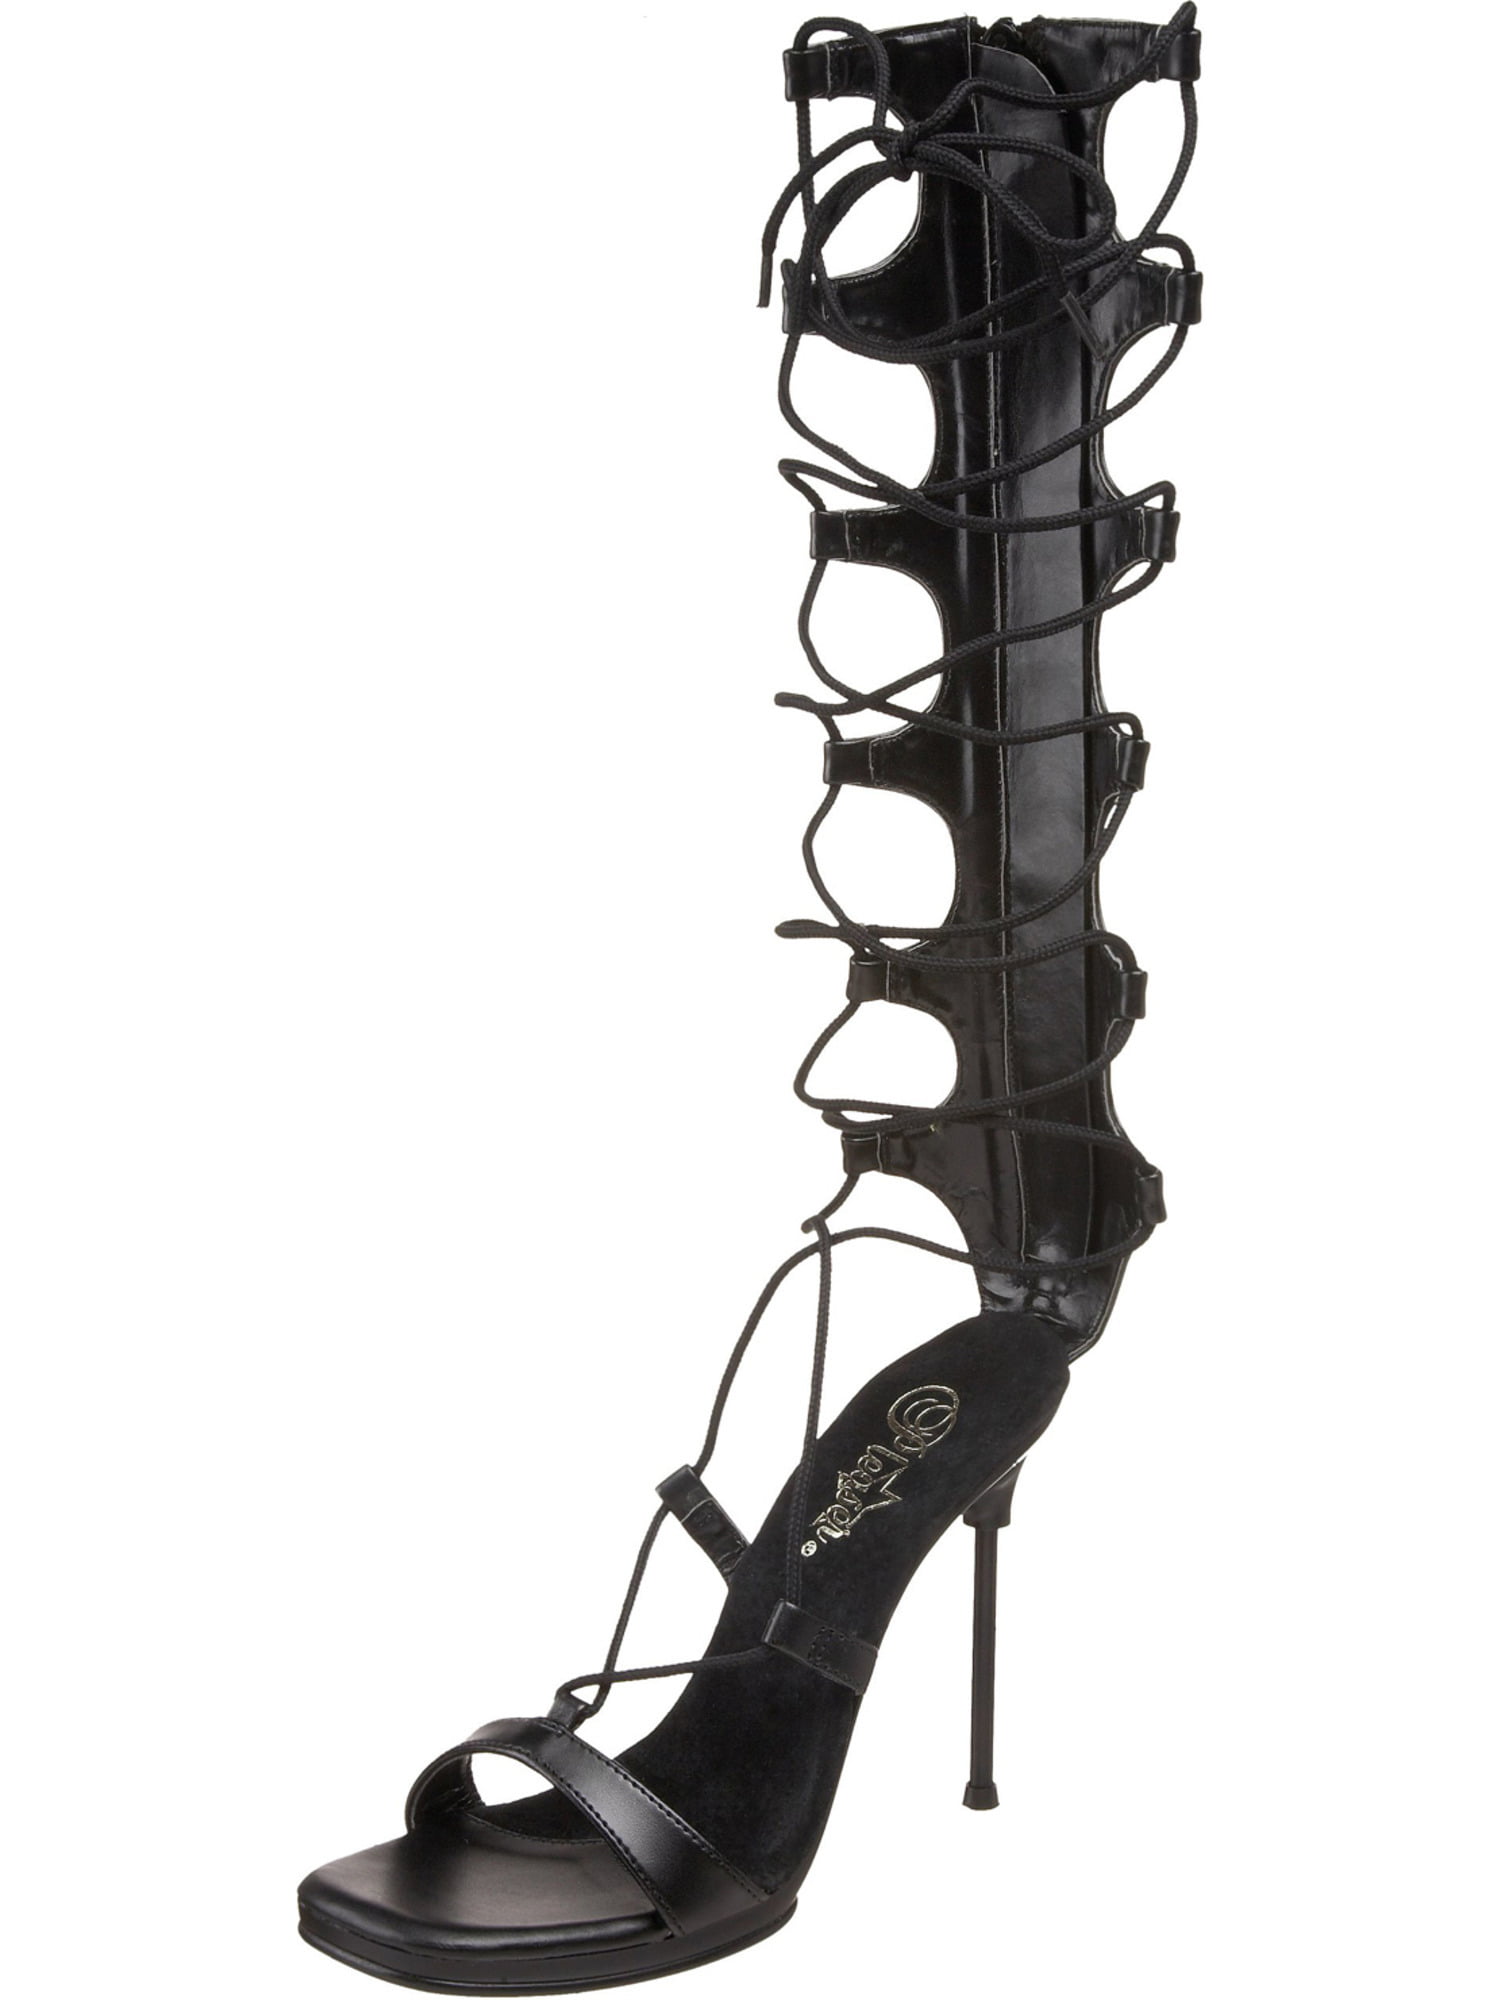 Pleaser - Womens Strappy Lace Up Sandals Knee High 4 1/2 Inch Stiletto ...